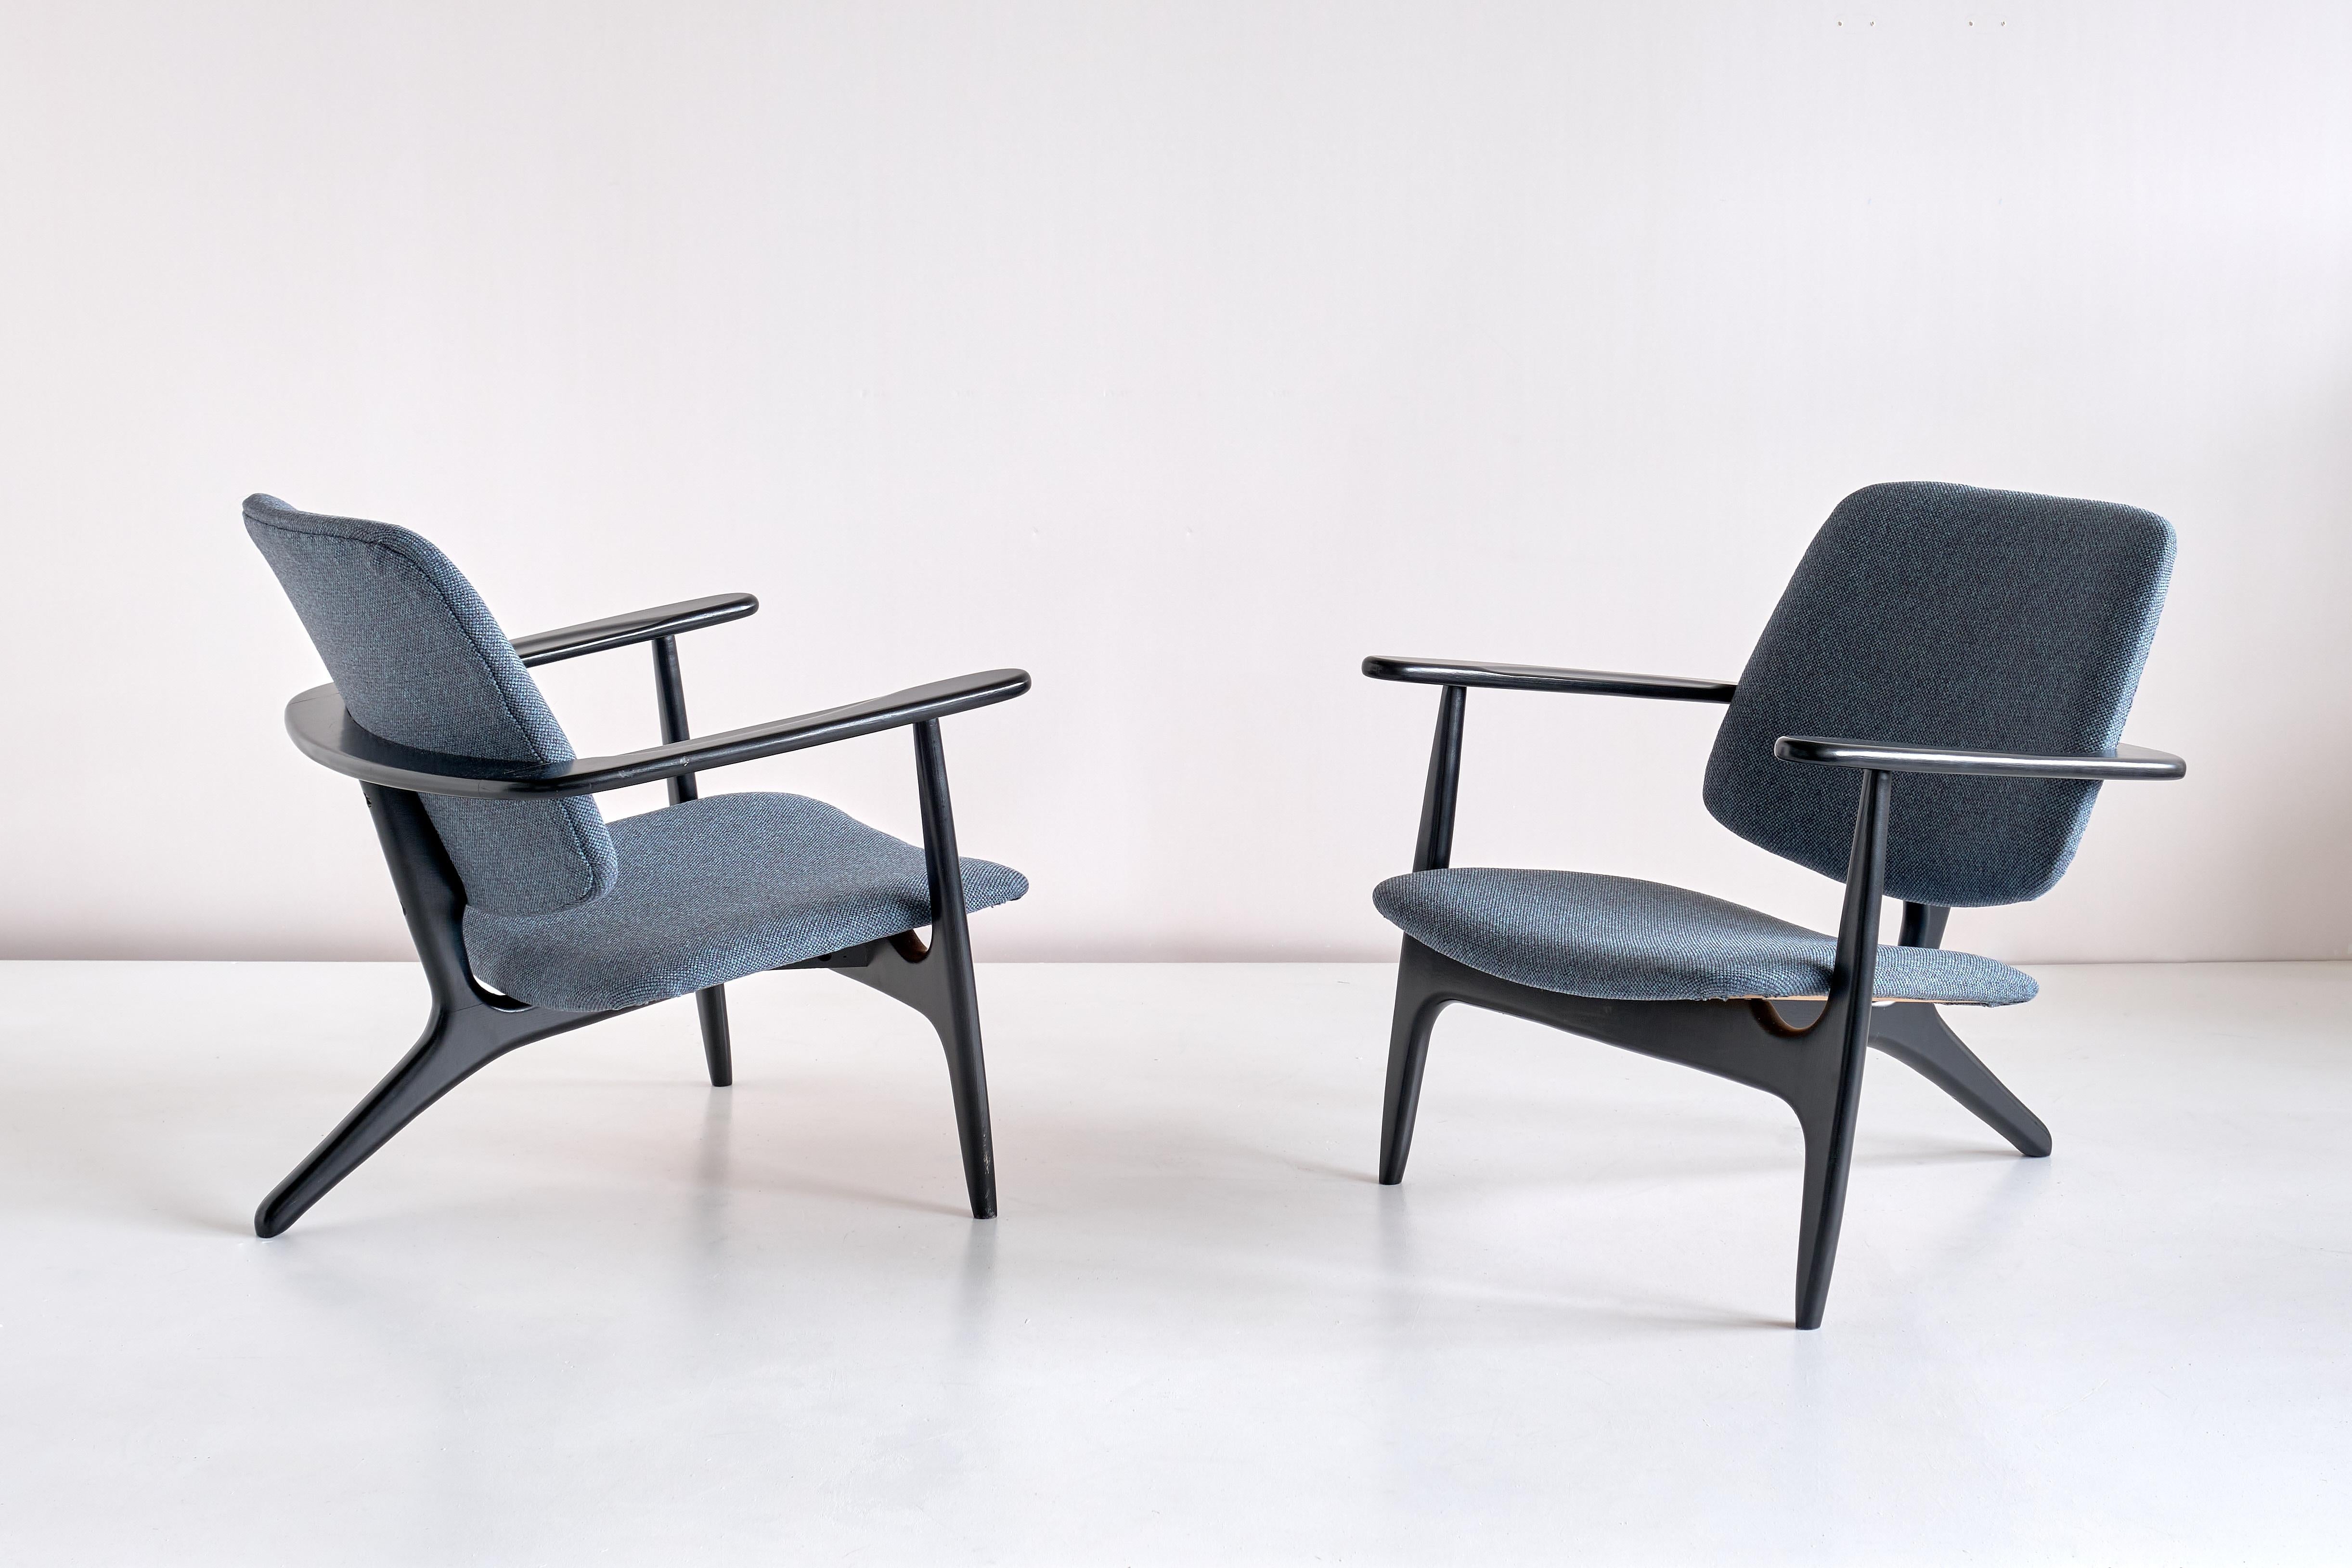 The S3 chair was designed by Alfred Hendrickx and produced by Belform in Belgium in 1958. This rare chair was a custom design by Hendrickx for the Sabena Airlines first class lounge in Zaventem Airport, Brussels. The three-legged, black lacquered